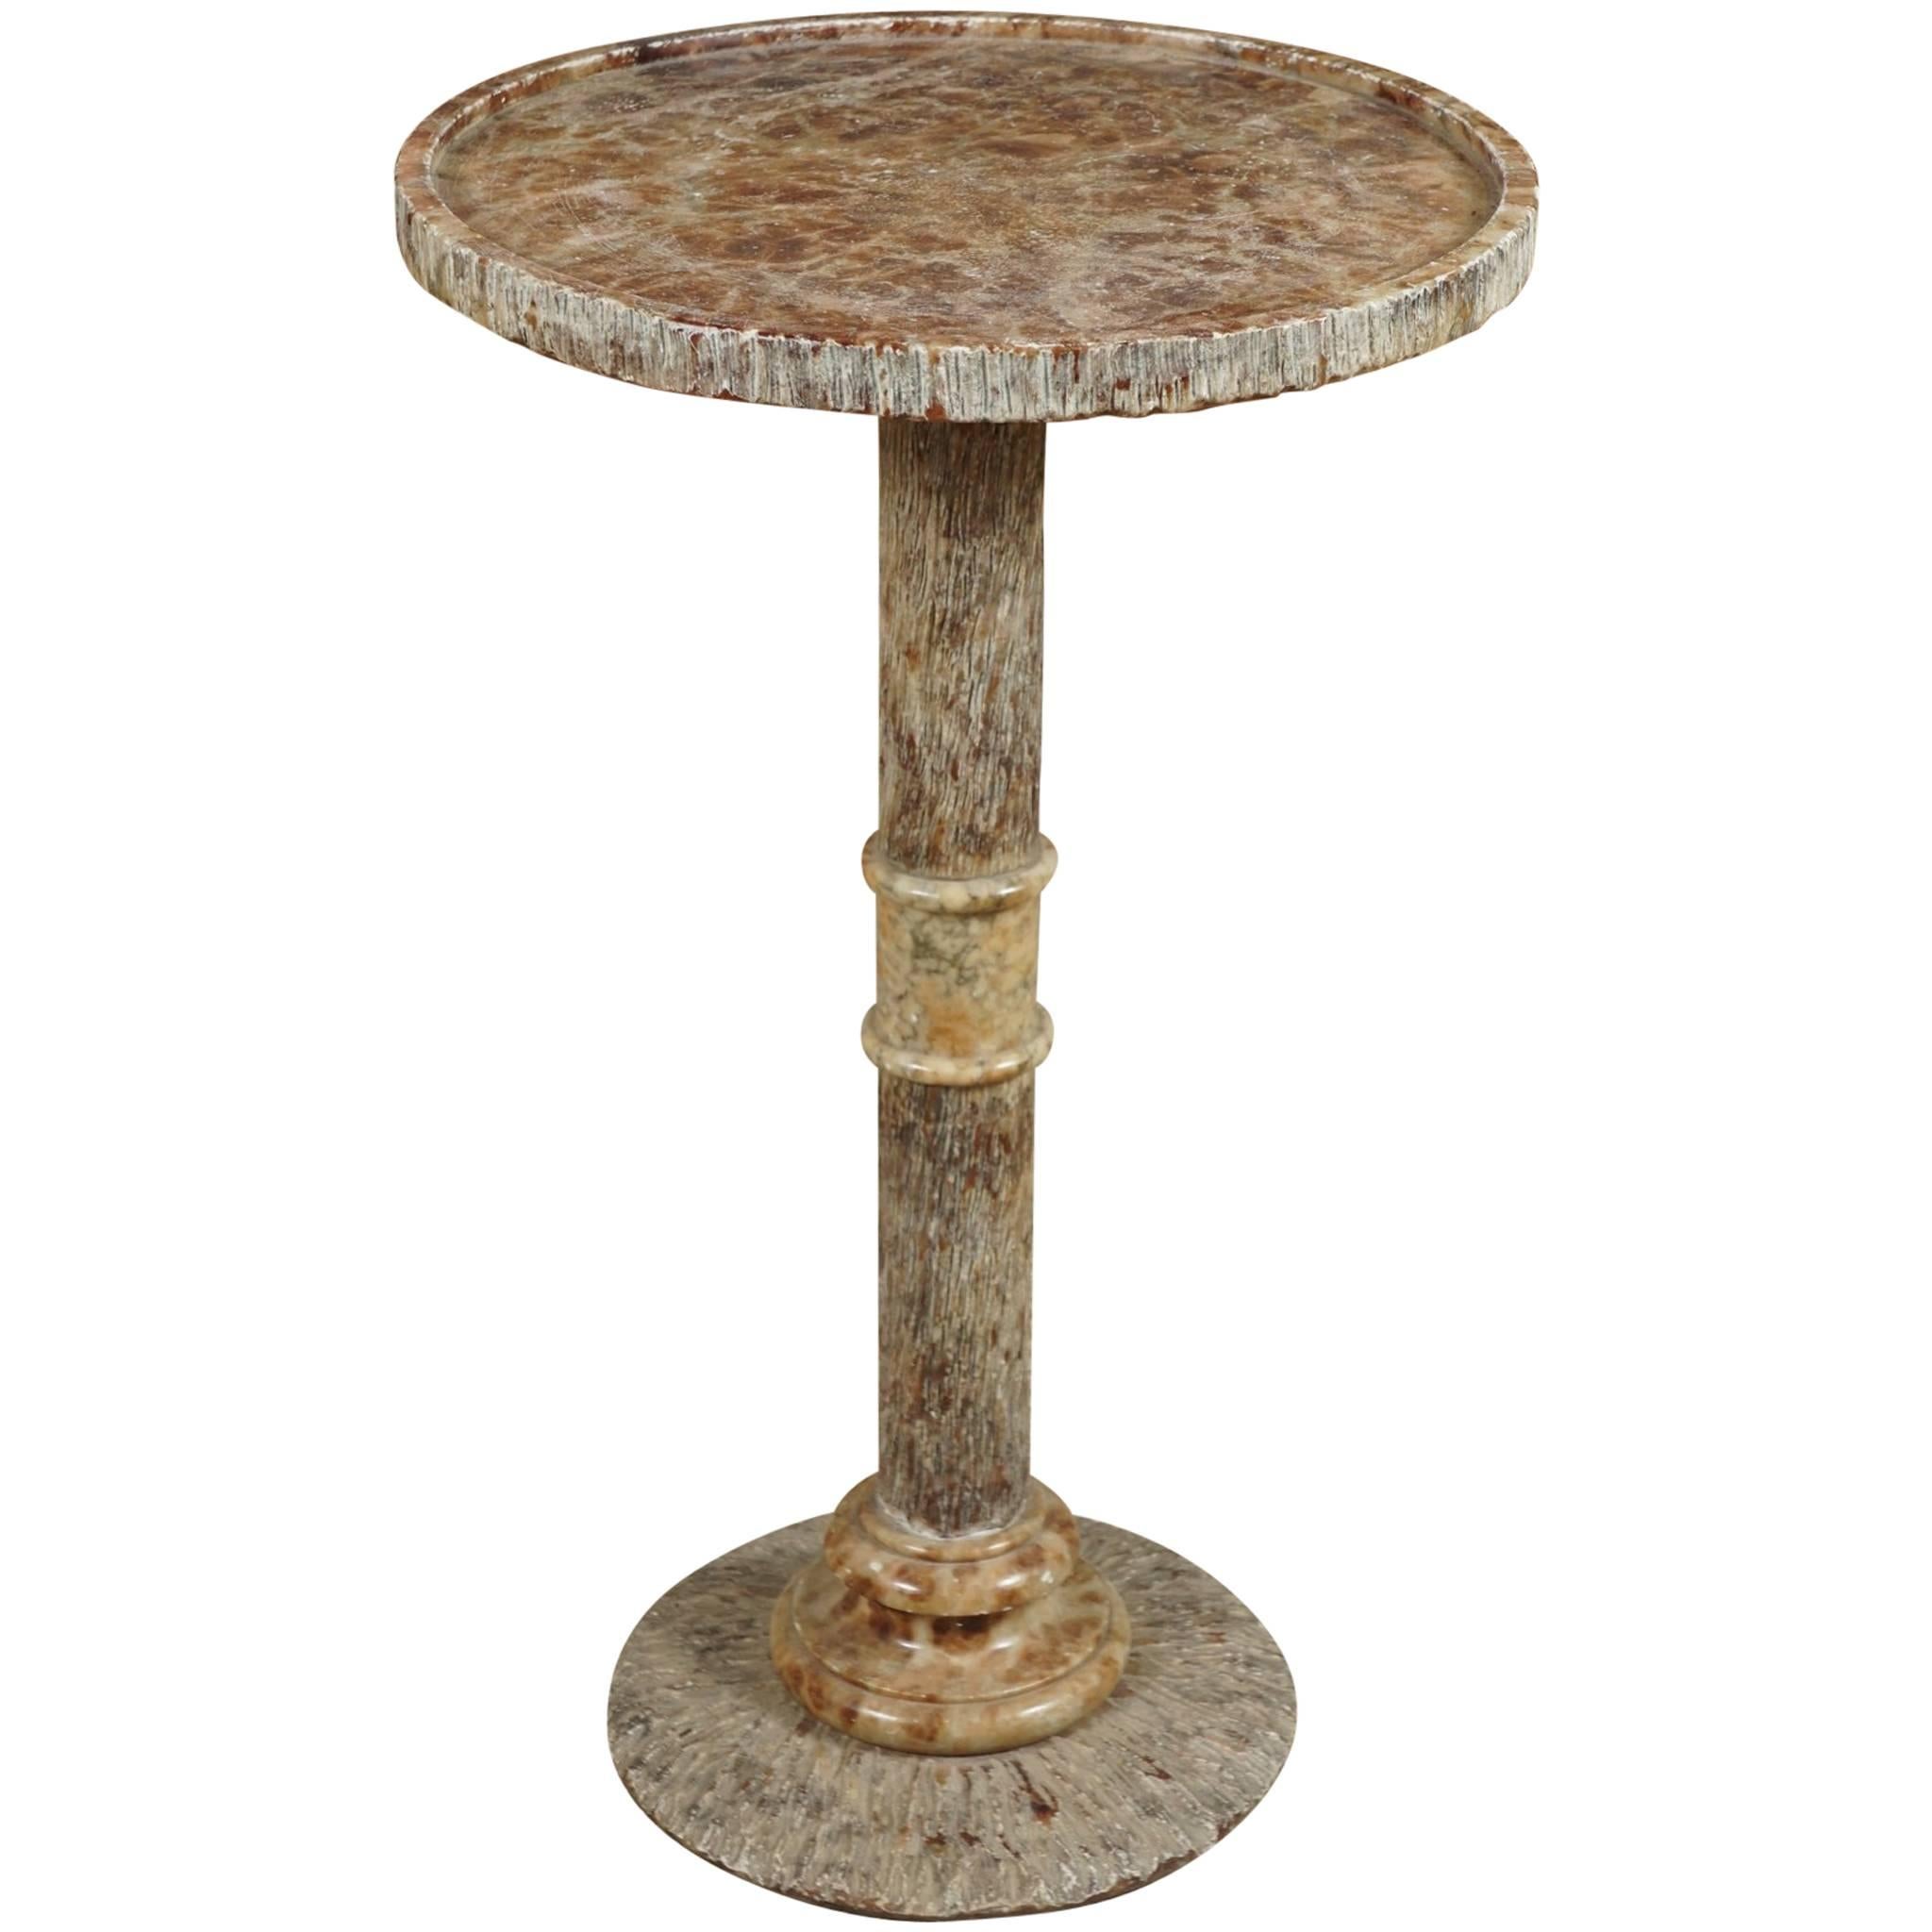 Marble Drinks Table in a Faux Bois